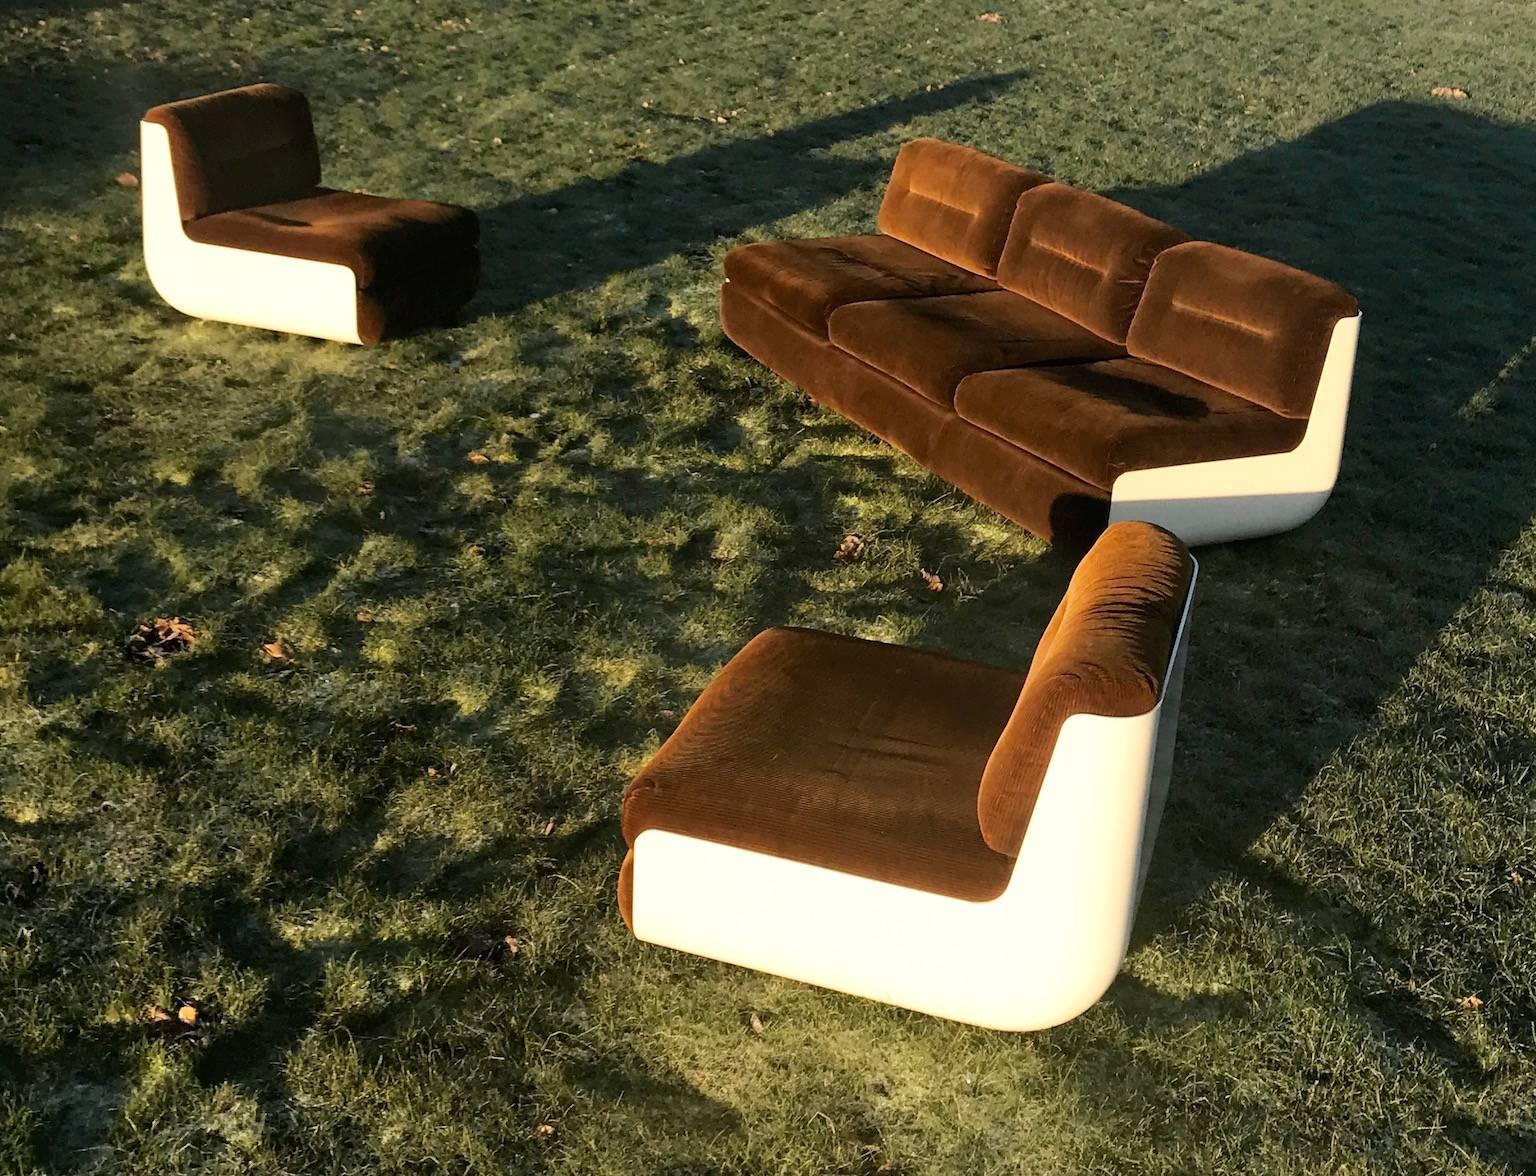 Rare lounge set by Italian Industrial Tarlisio Arredamenti late 1960s. Designed by two of Italy´s great designers Giotto Stoppino and Rodolfo Bonetto.

The model is named Bossa and was produced in a very low number. 

Made of beautiful molded